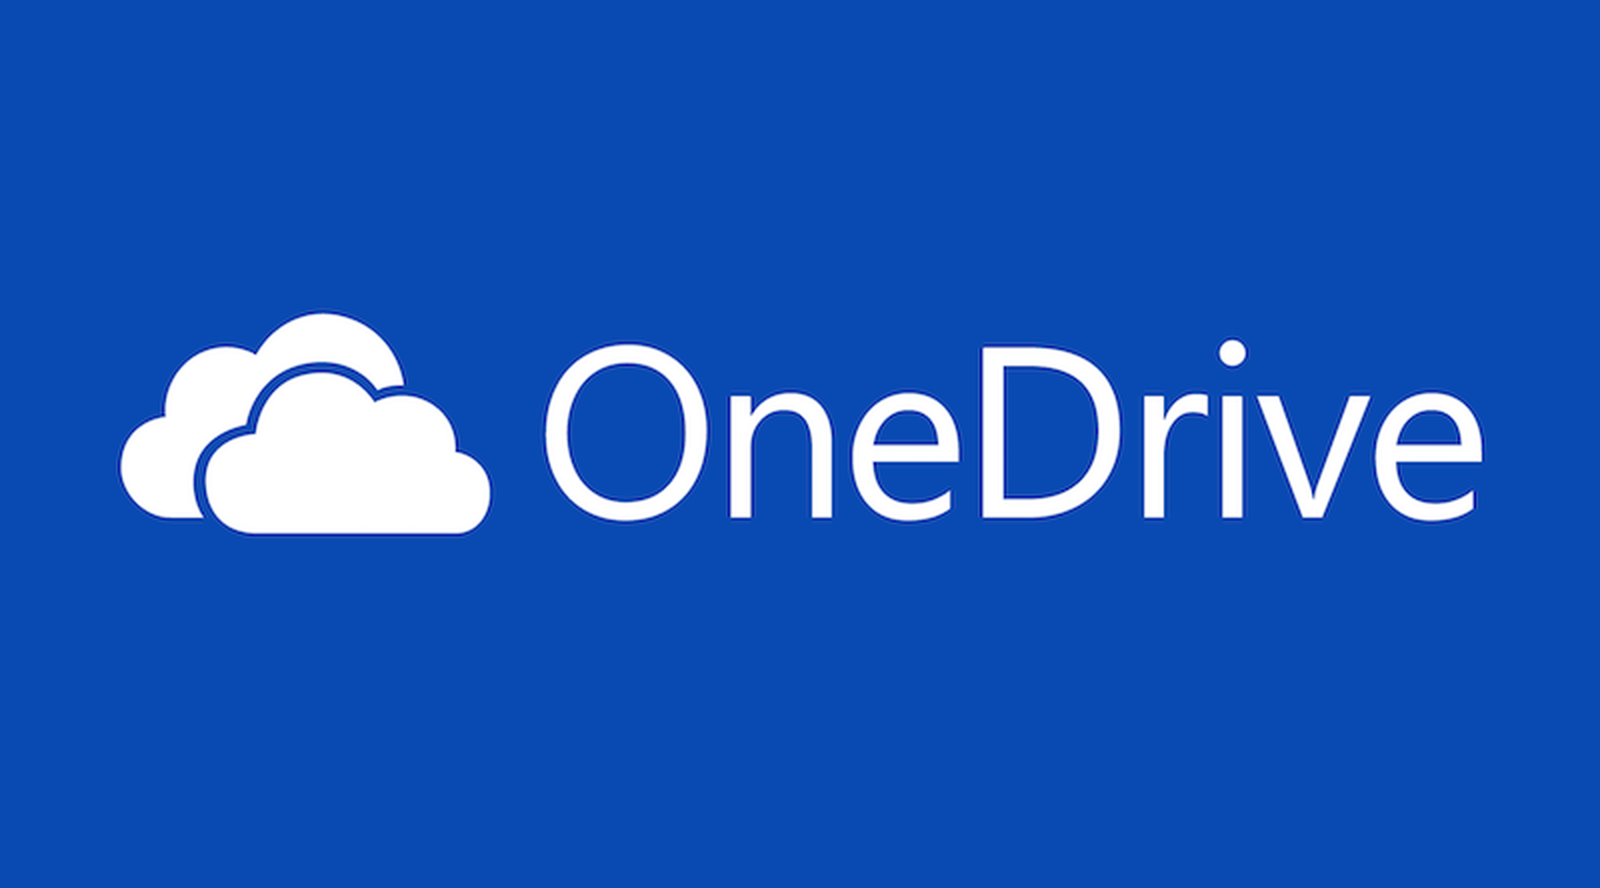 onedrive for business login on mac